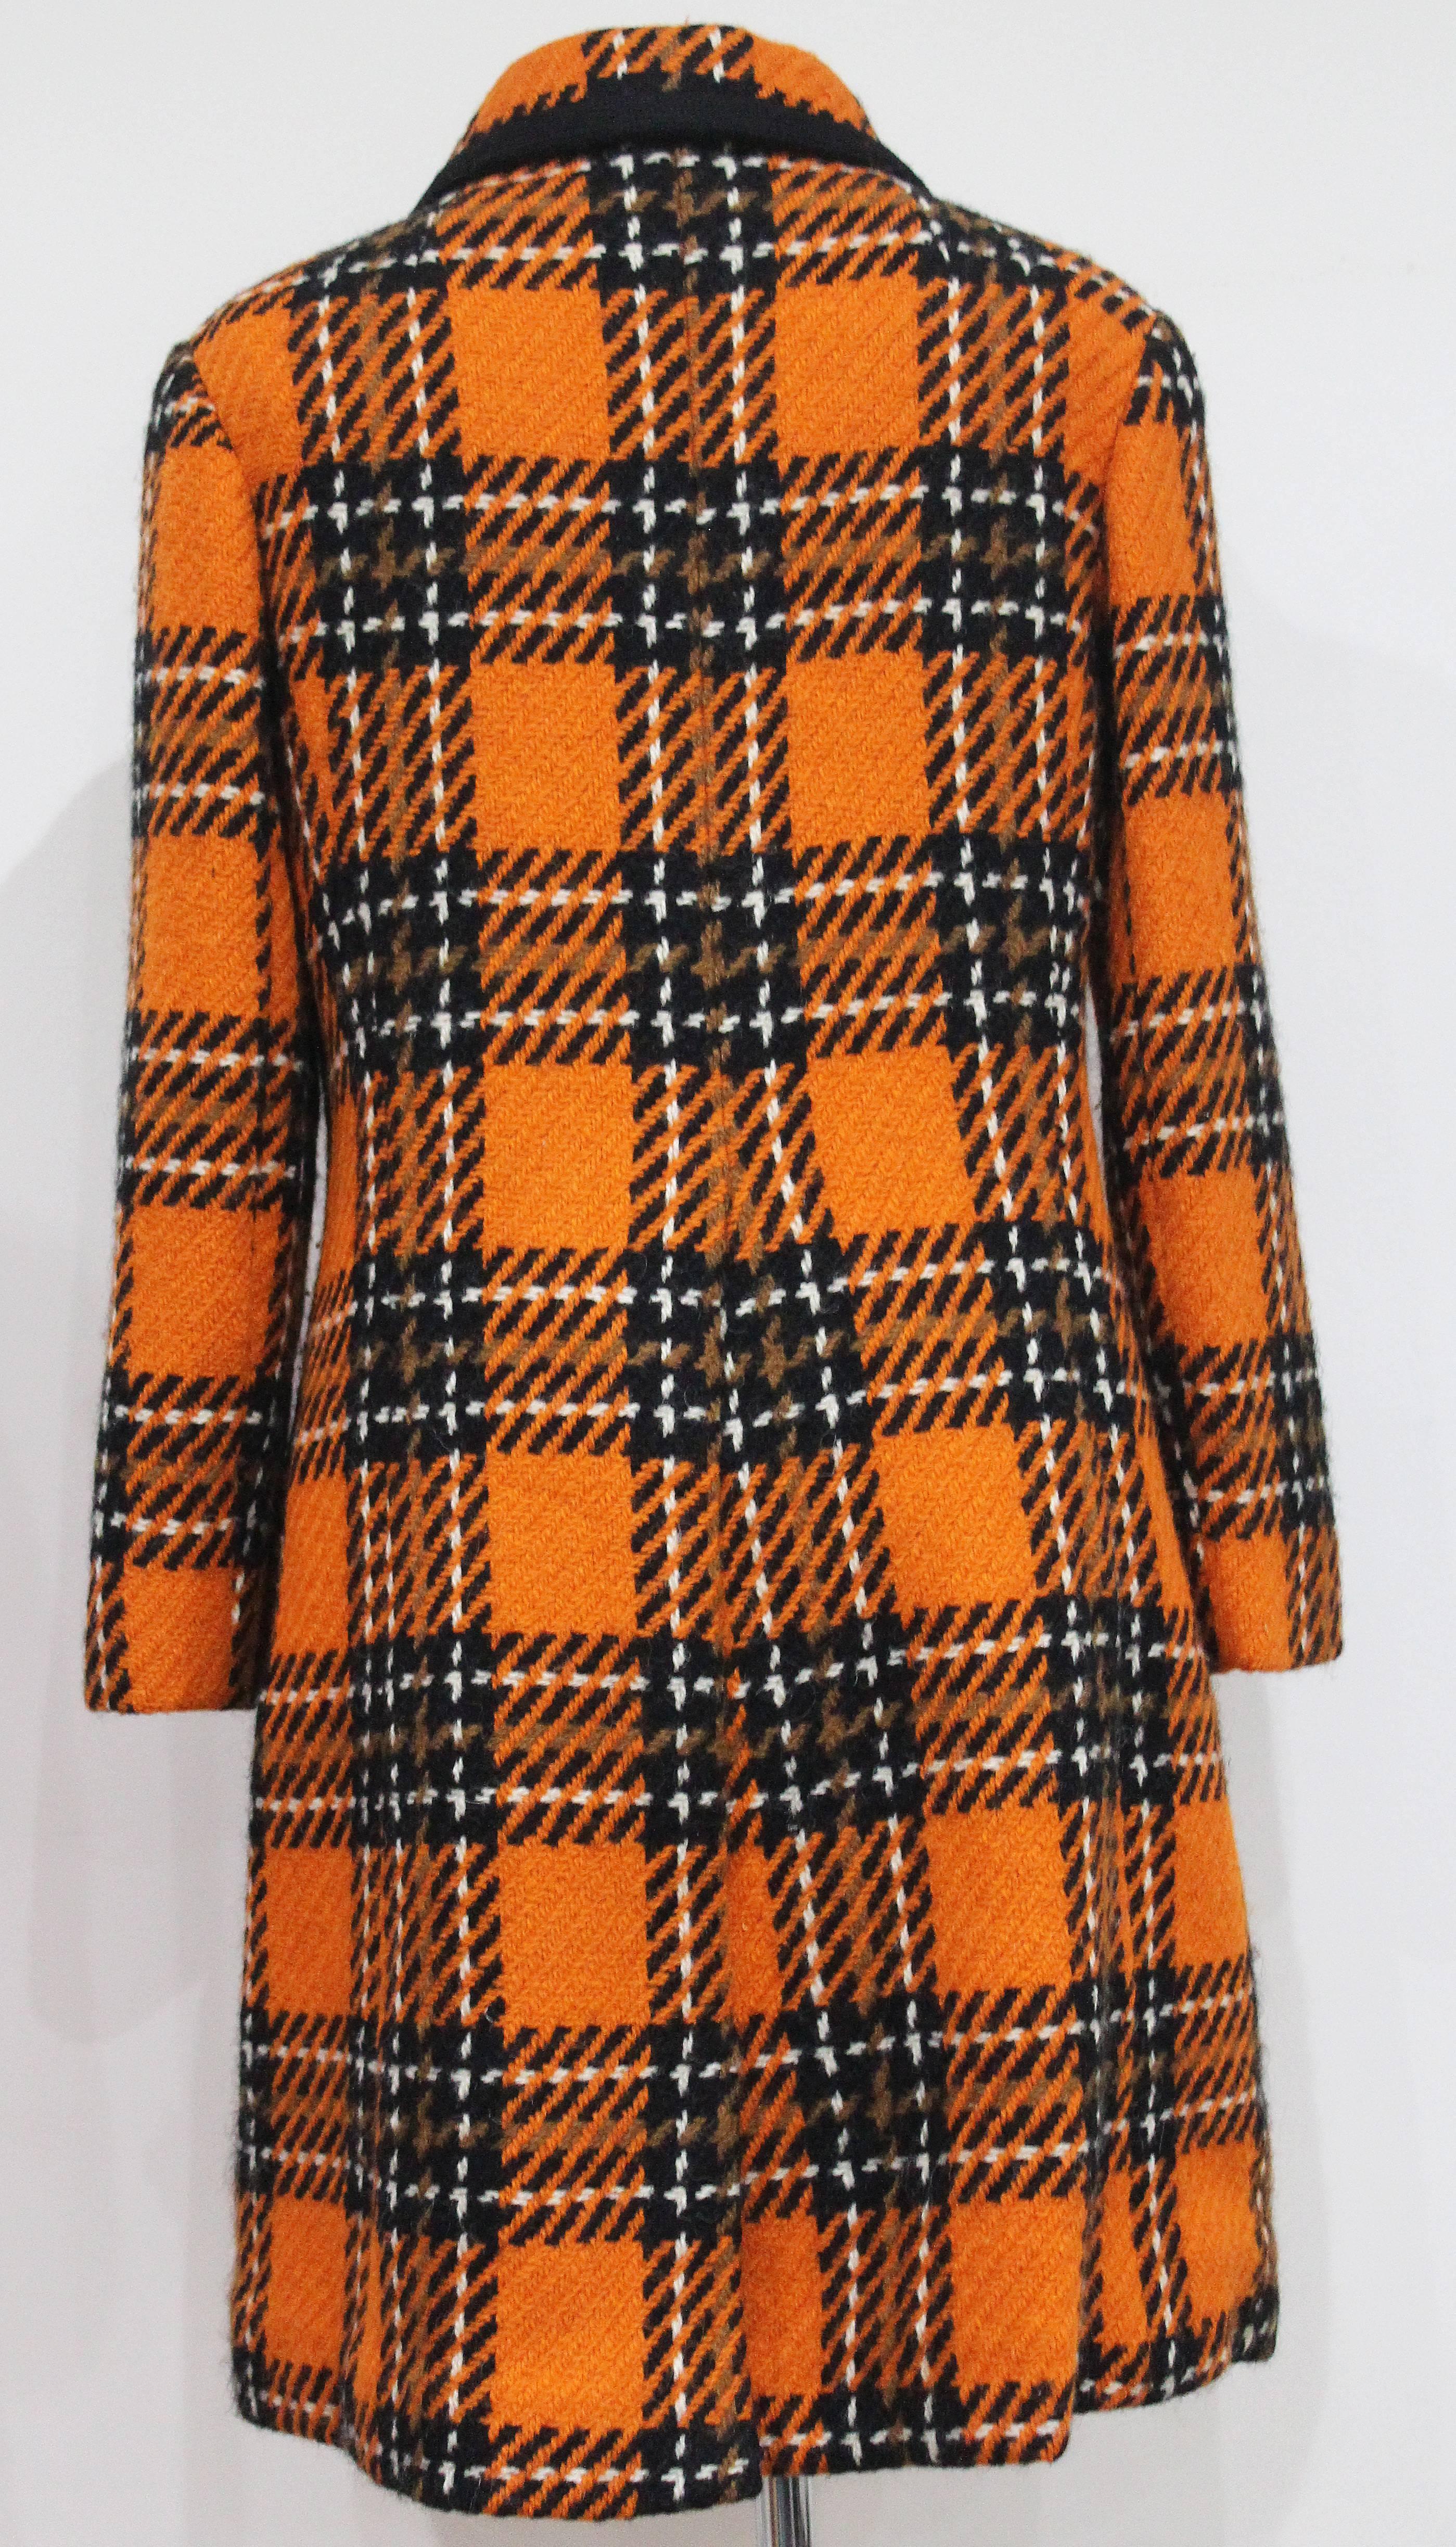 Women's 1960s English checked tweed tailored coat by Royal Dressmaker, Hardy Amies 